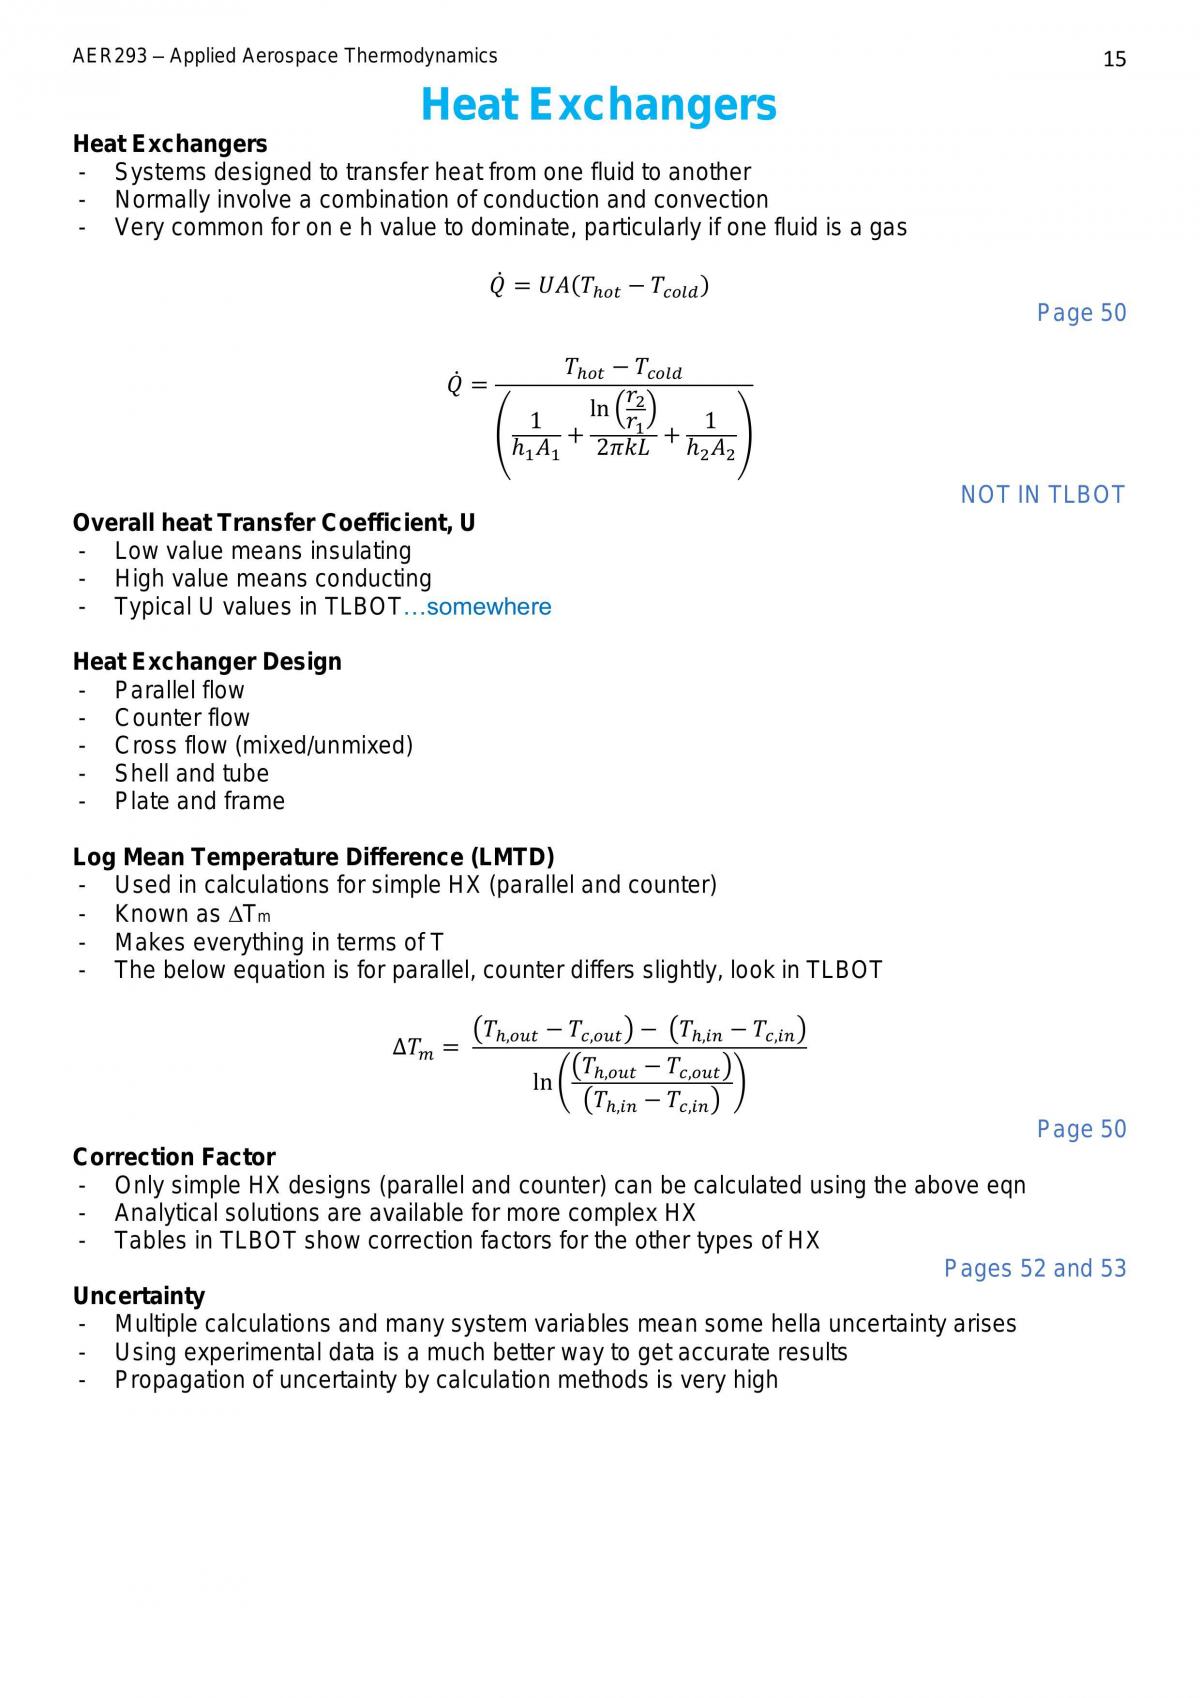 Applied Aerospace Thermodynamics Notes - Page 15